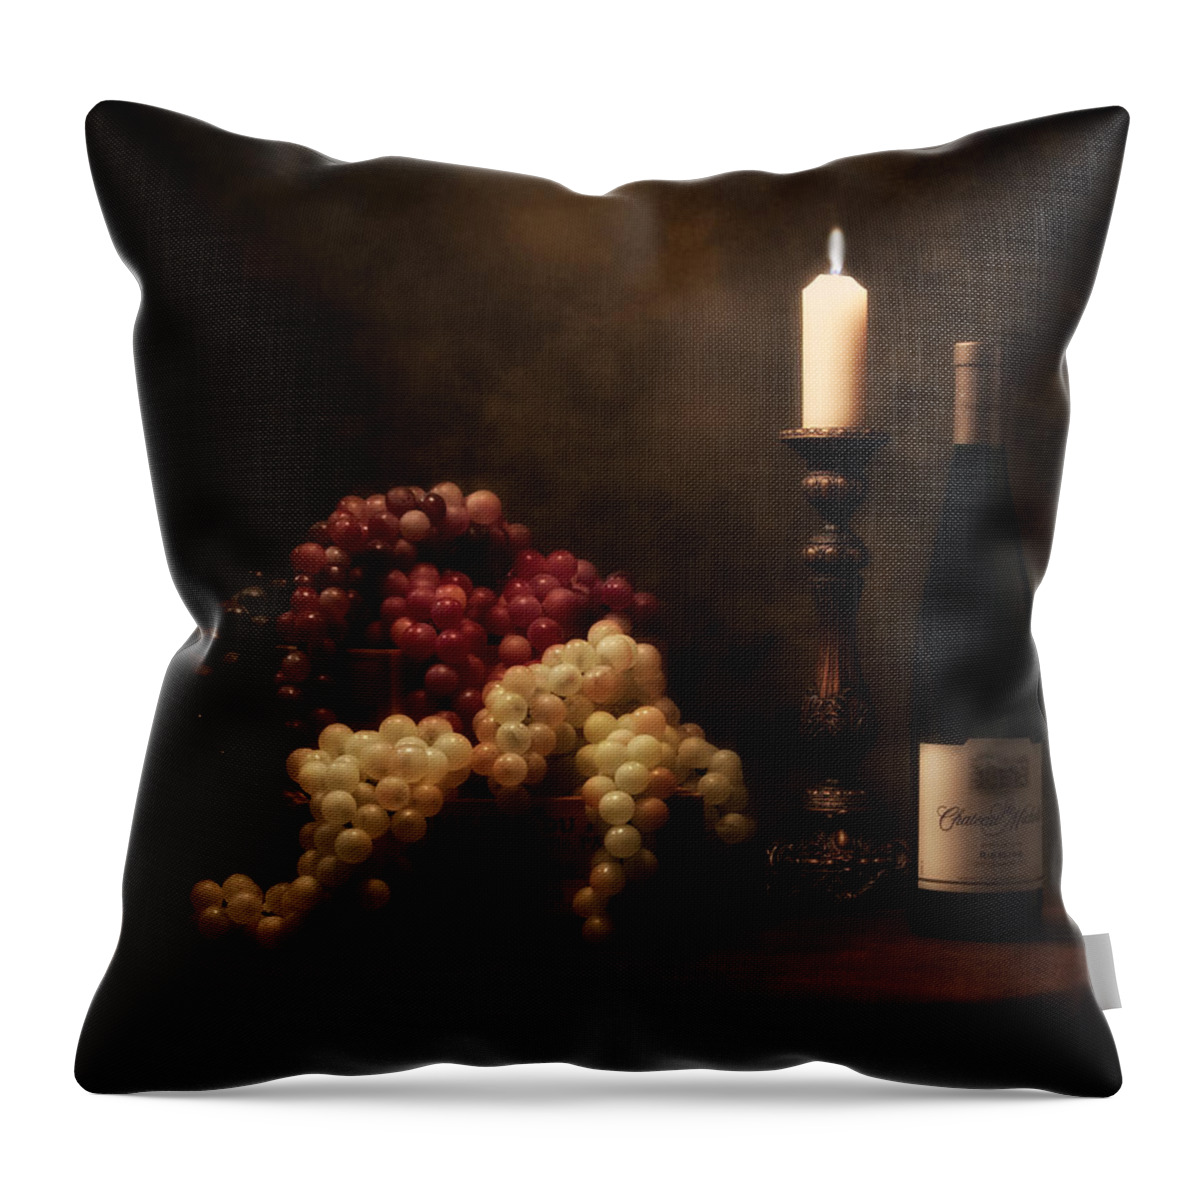 Alcohol Throw Pillow featuring the photograph Wine Harvest Still Life by Tom Mc Nemar